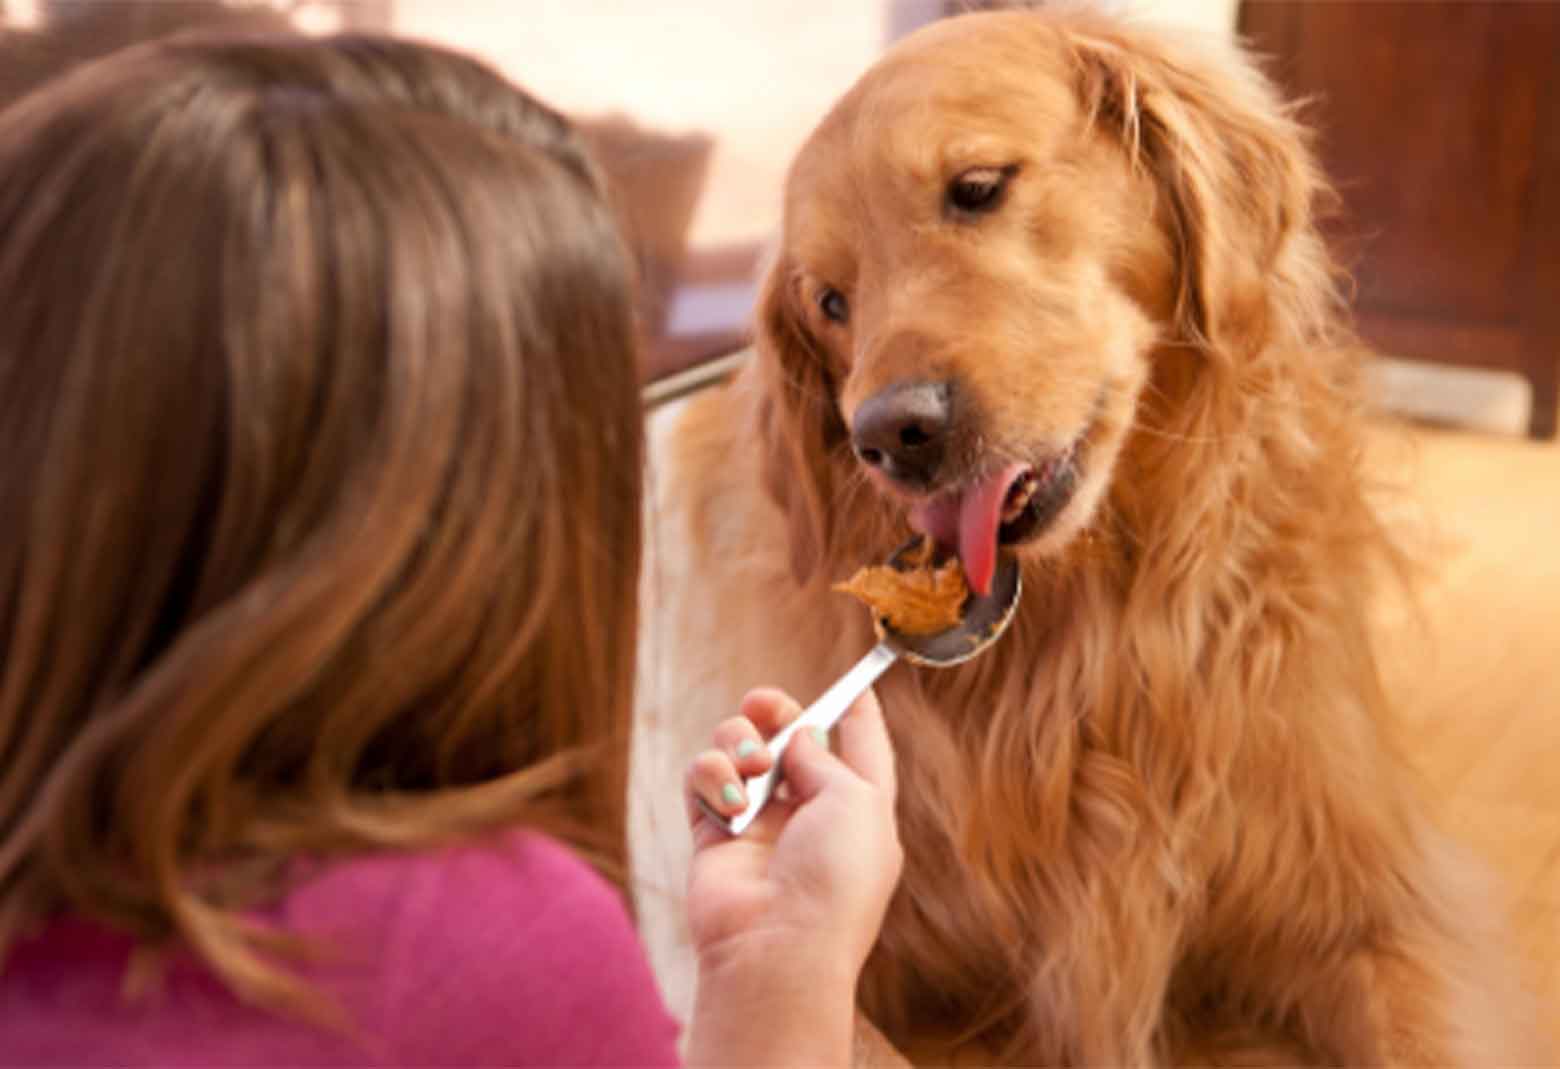 https://cdn.shopify.com/s/files/1/0339/3110/0219/files/The-Health-Benefits-Of-Peanut-Butter-For-Dogs-1.jpg?v=1658256997